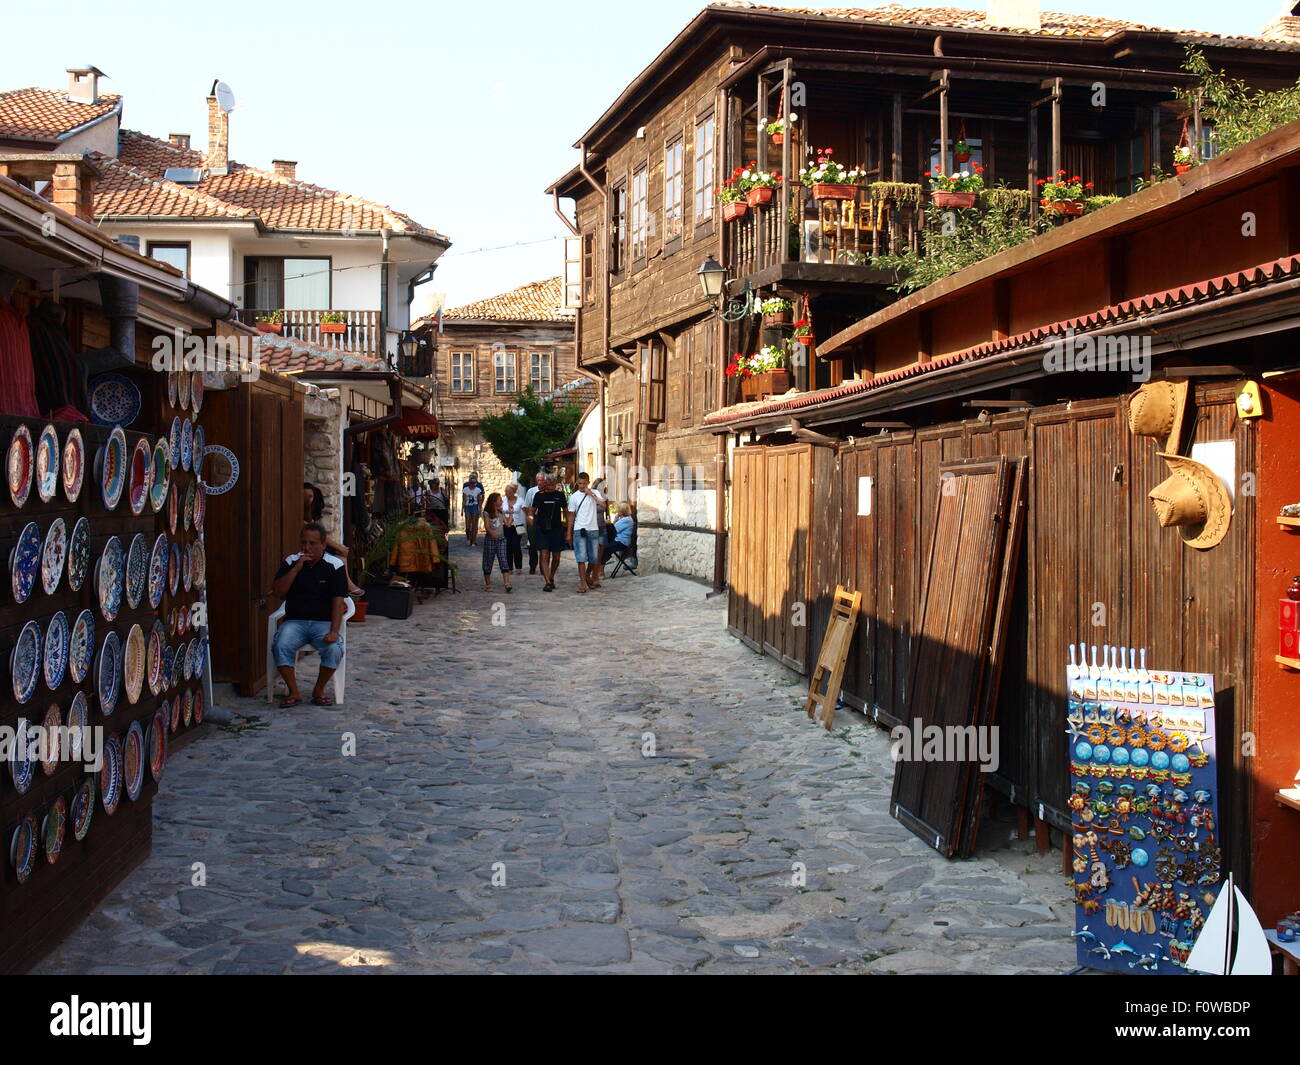 Bulgaria, Nessebar. Shops with folk products and souvenirs in a stylish wooden houses. Stock Photo